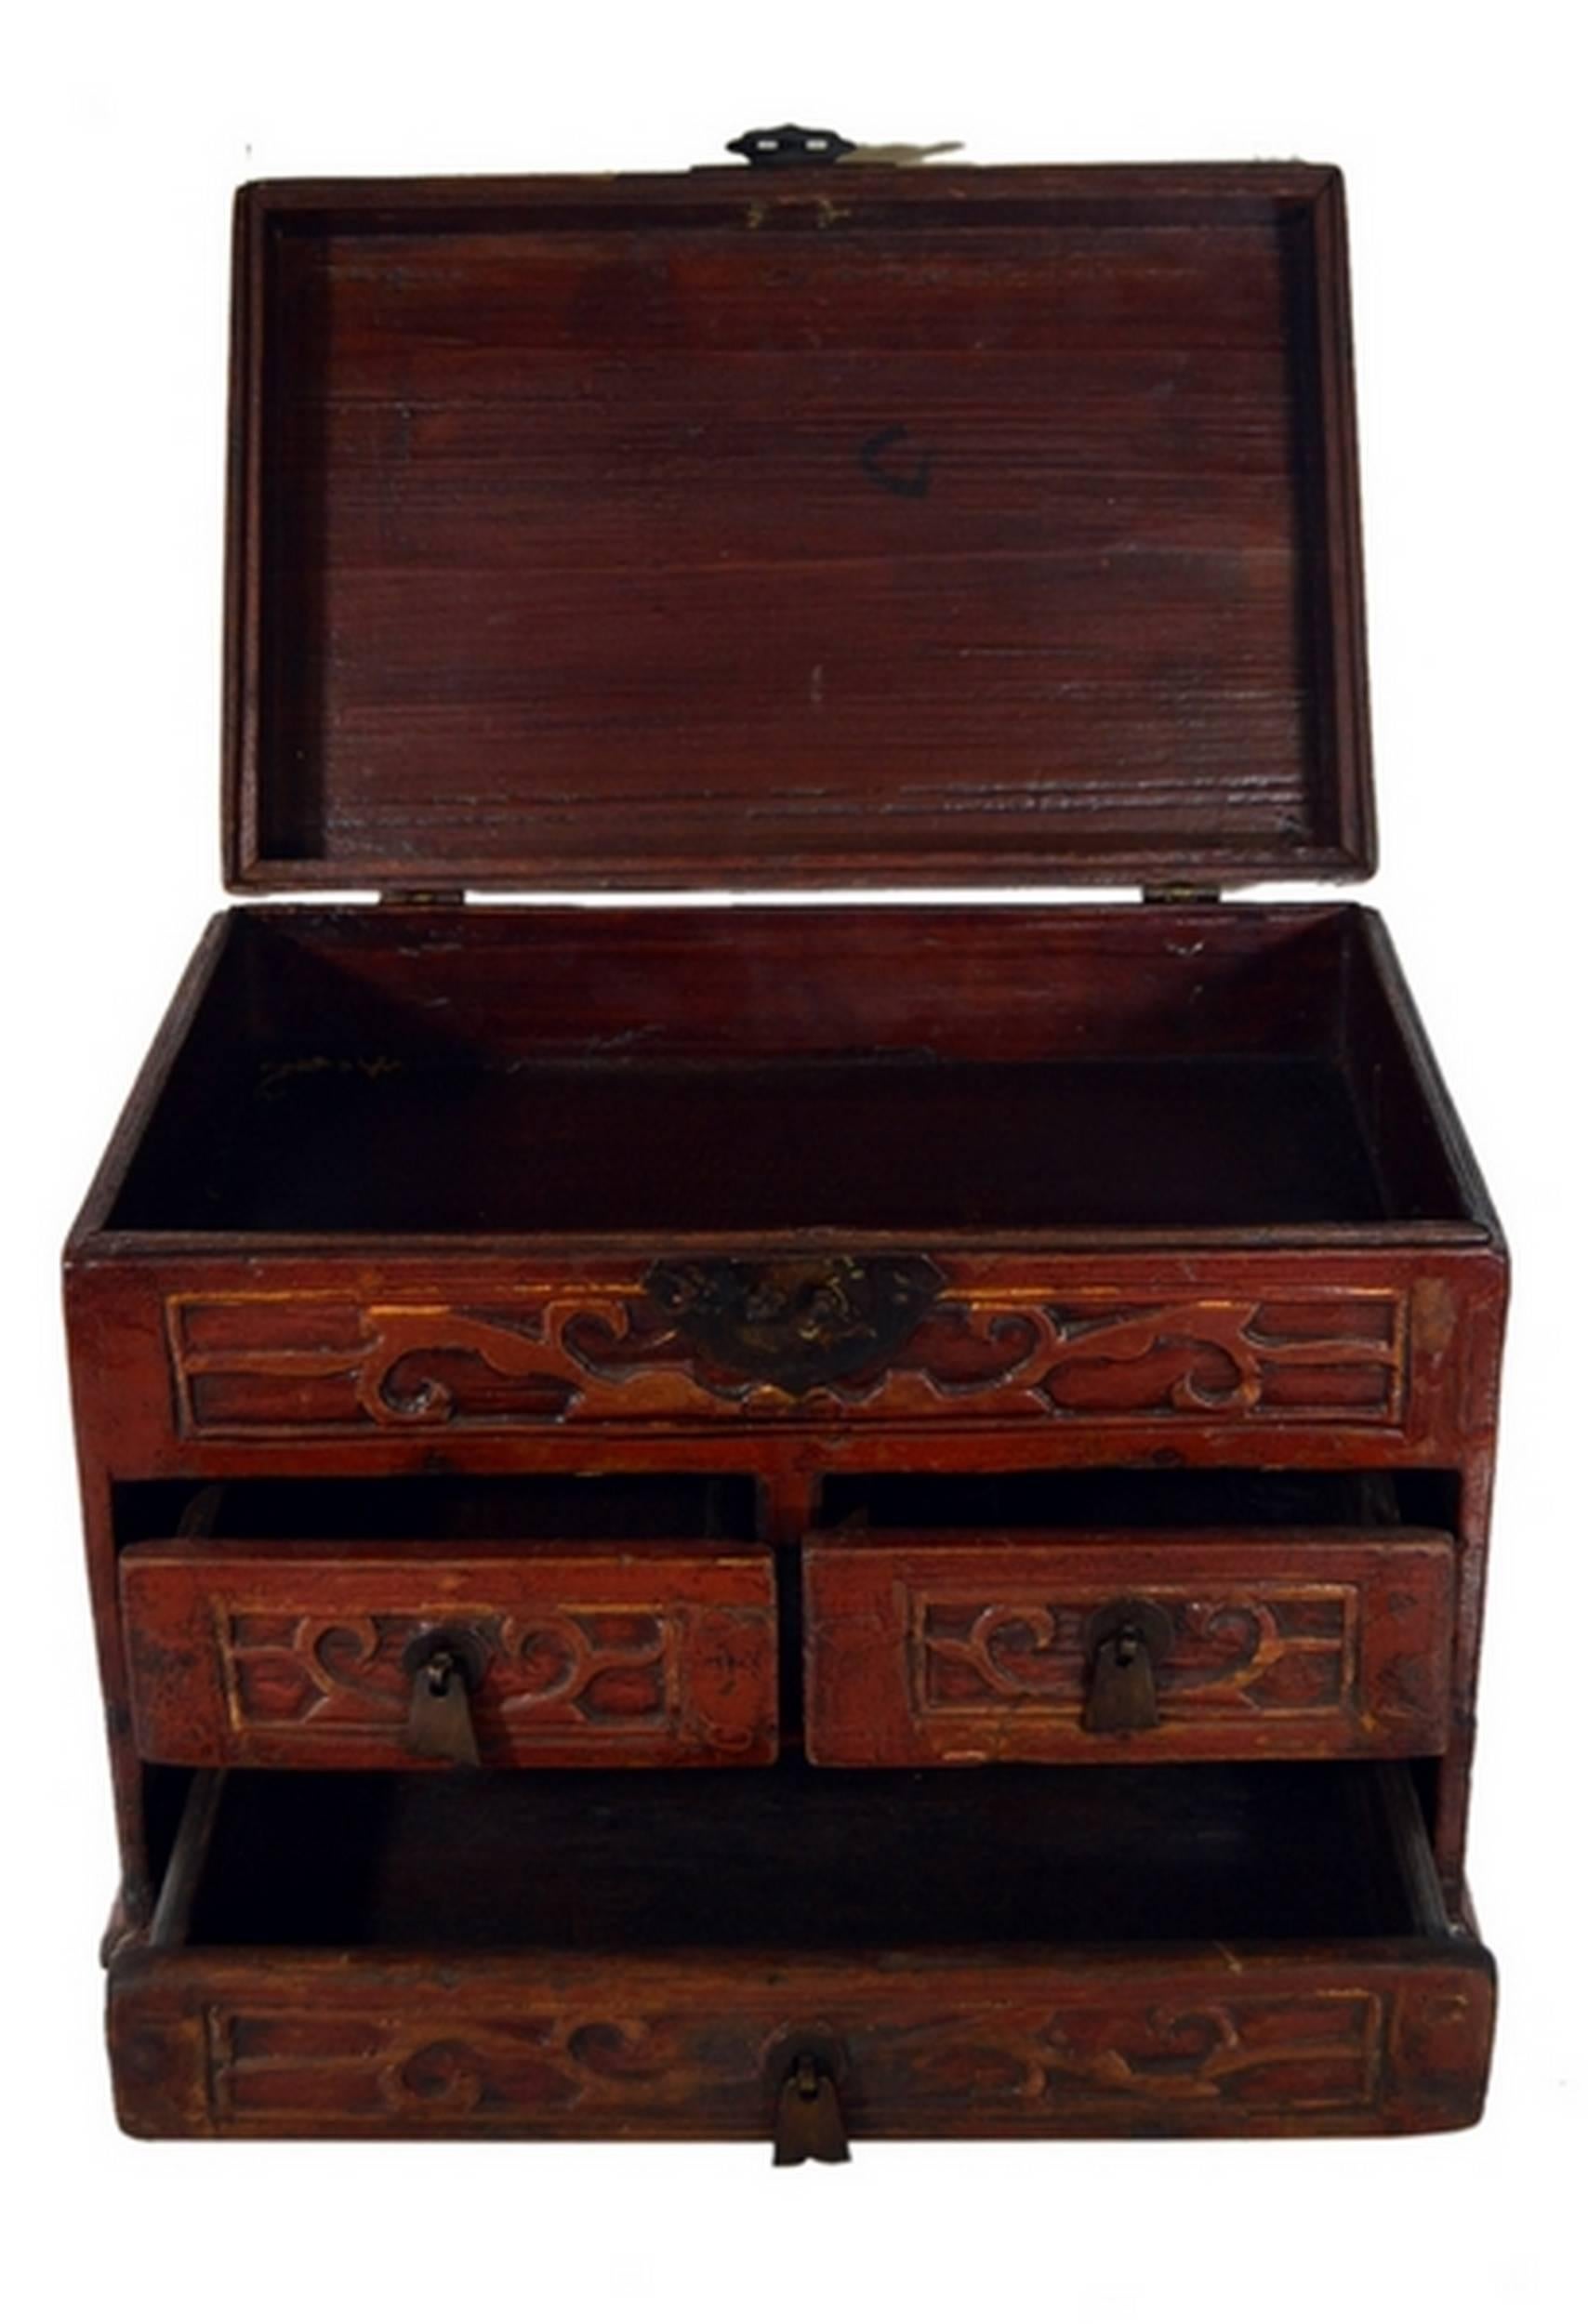 A mid-20th century Chinese jewelry box featuring carved and lacquered drawers. This small rectangular box displays a large bottom drawer and two smaller drawers with carved flat bell-shaped handles. The top opens thanks to a carved hardware lock and